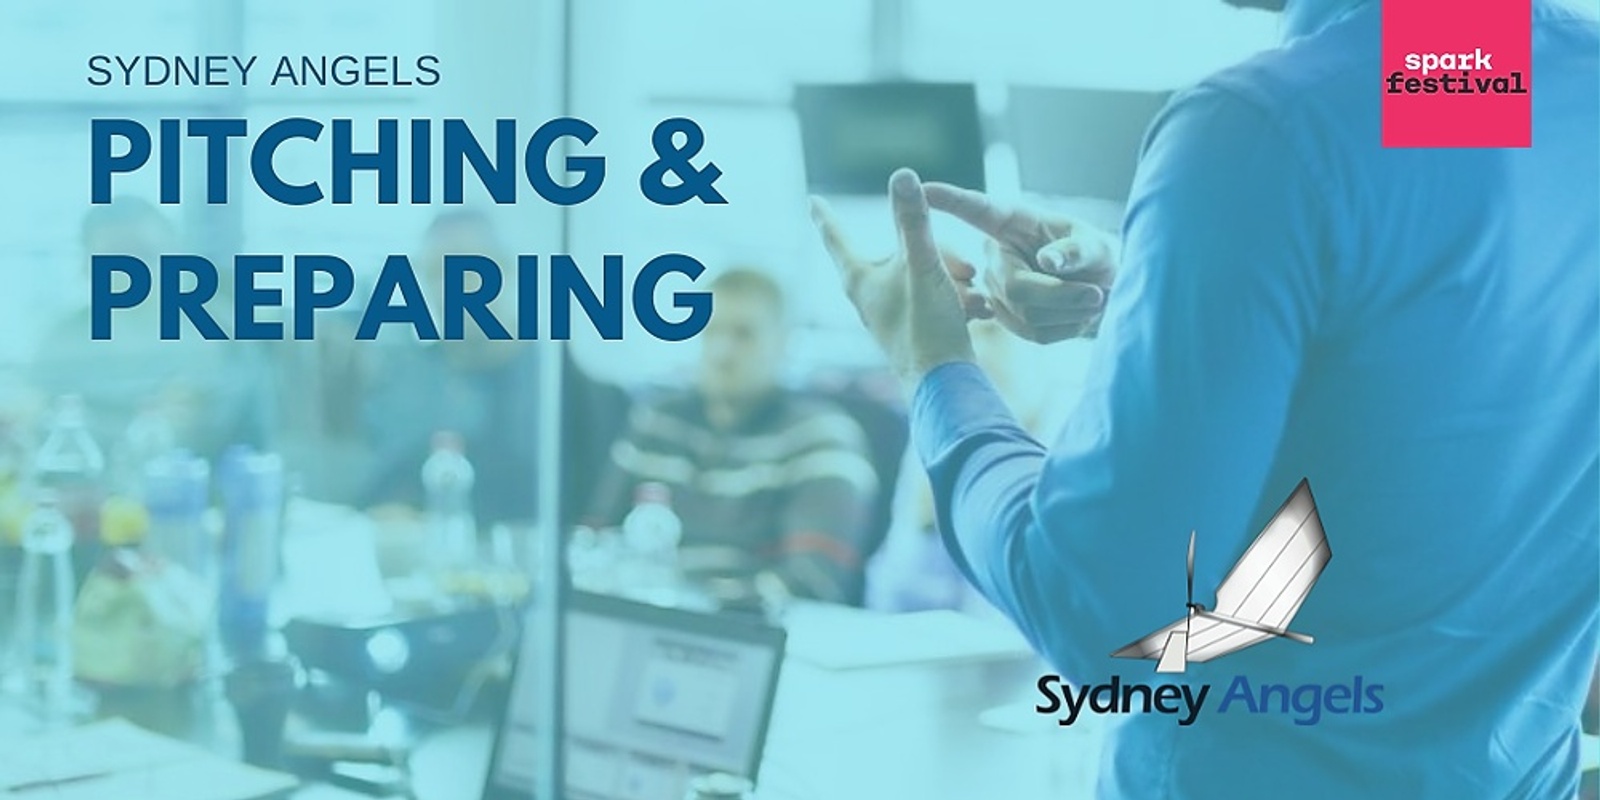 Banner image for Sydney Angels Pitching & Preparing